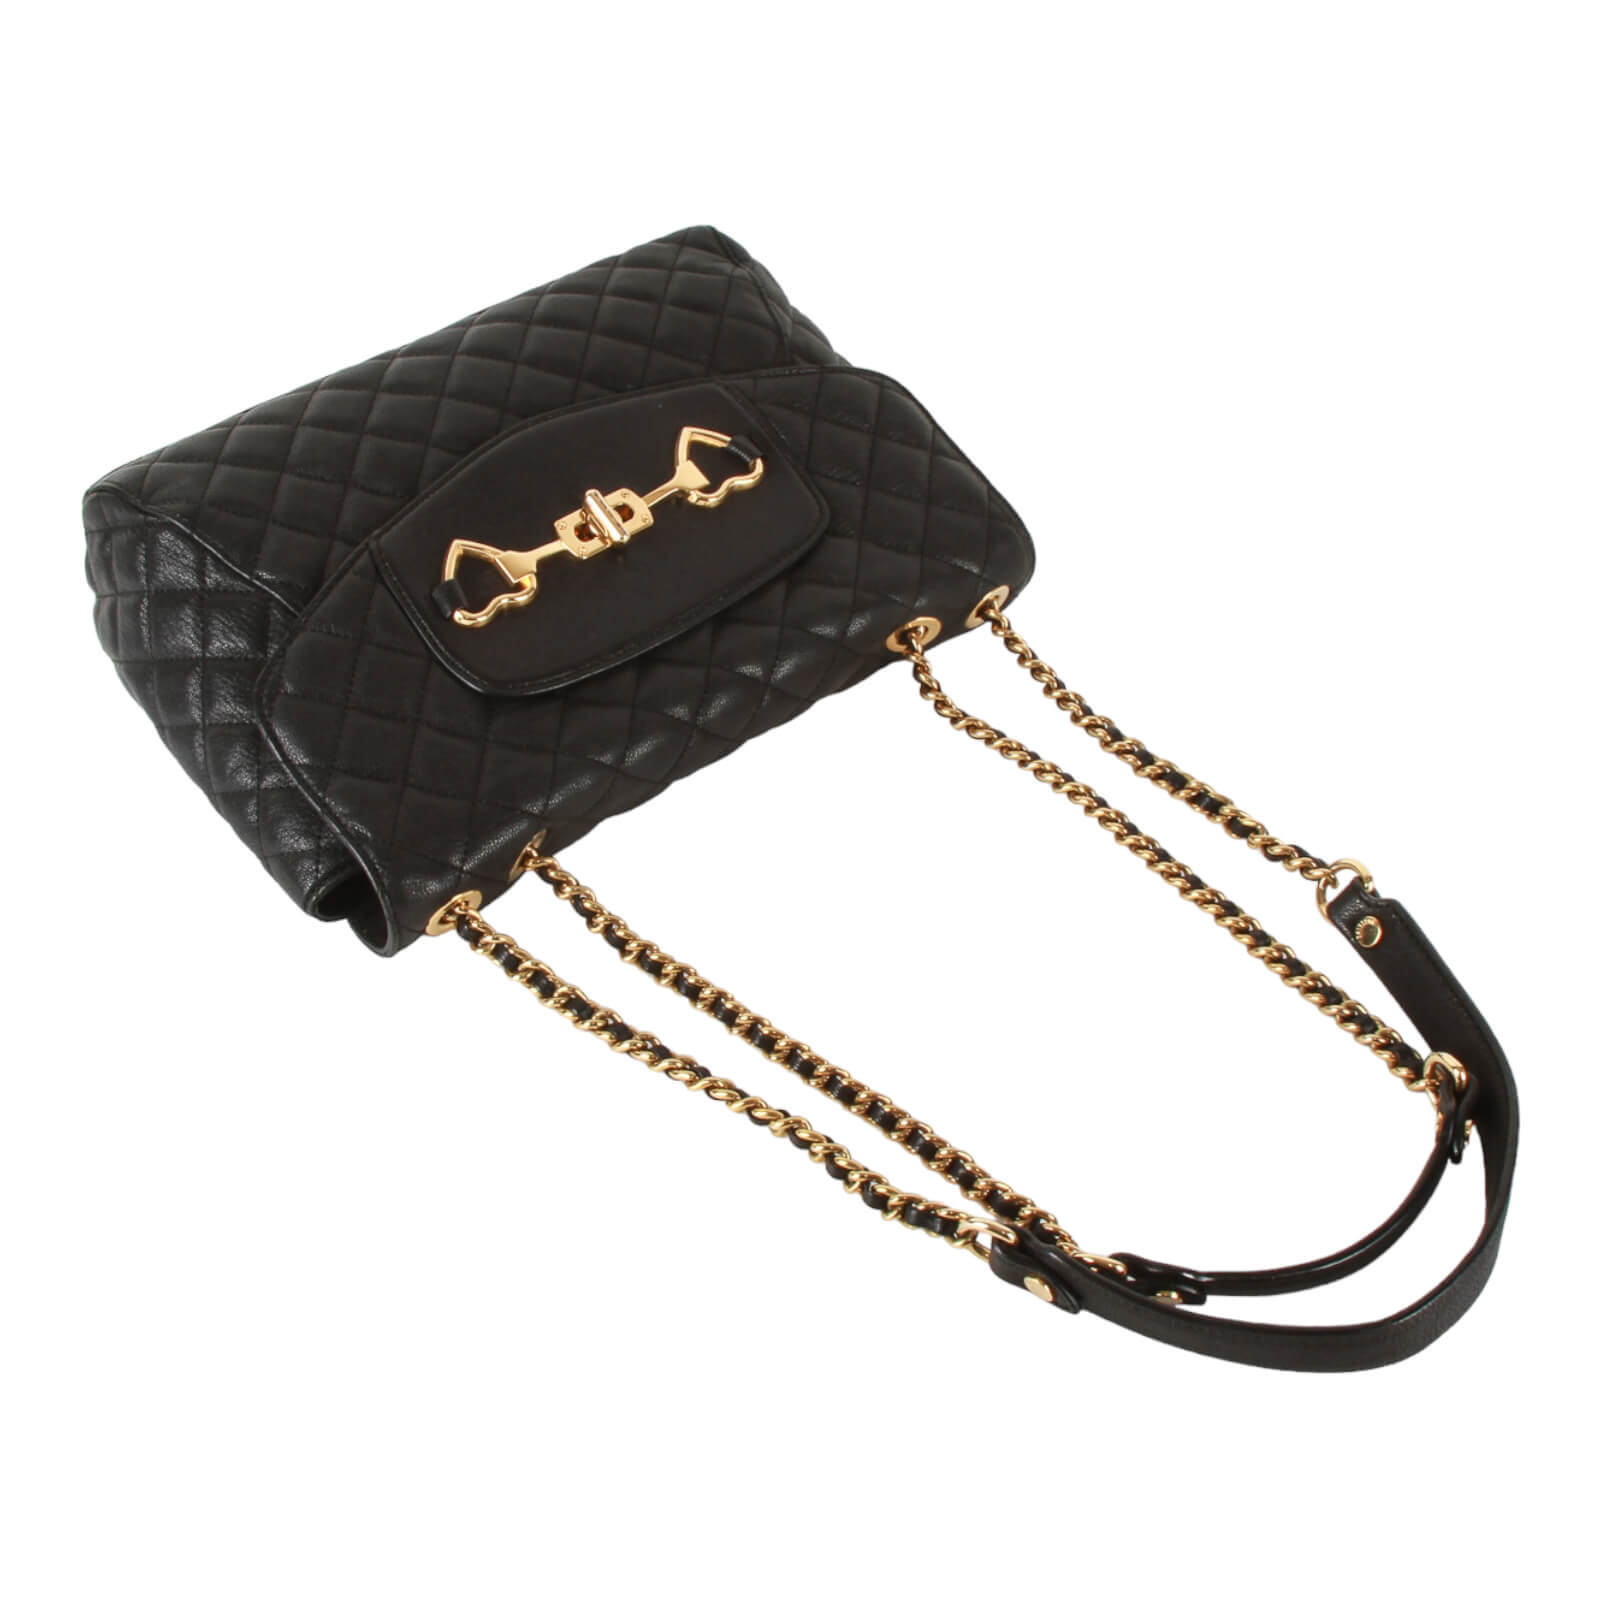 Black Leather-Look Quilted Chain Strap Shoulder Bag | New Look